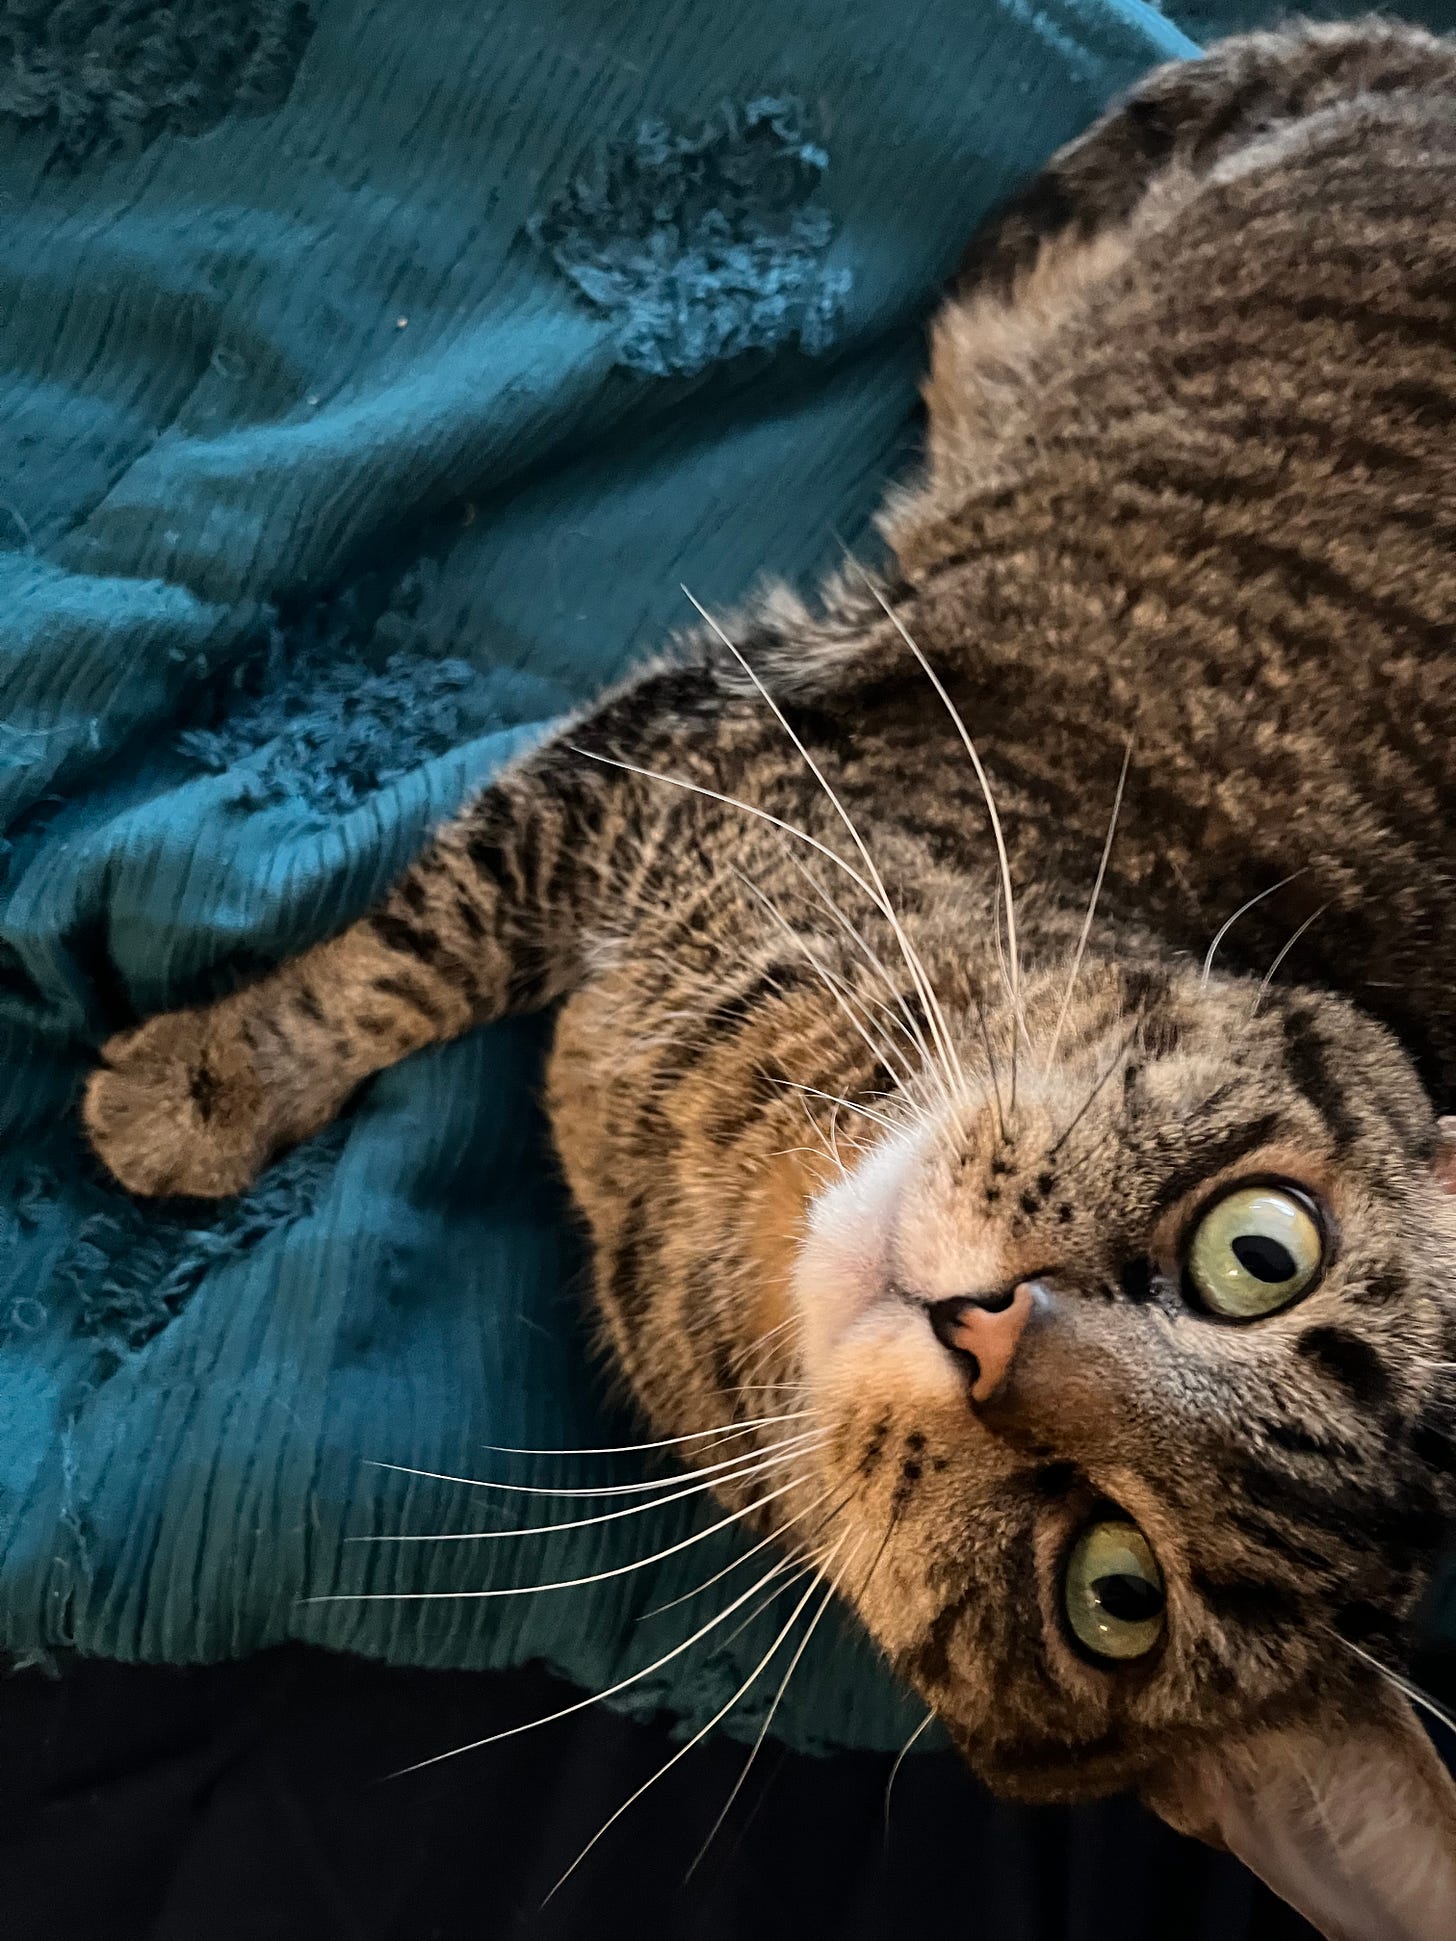 Picture of a cat looking up at the camera while lying on a teal bedspread. The cat is brown/gray striped with green eyes and long white whiskers.